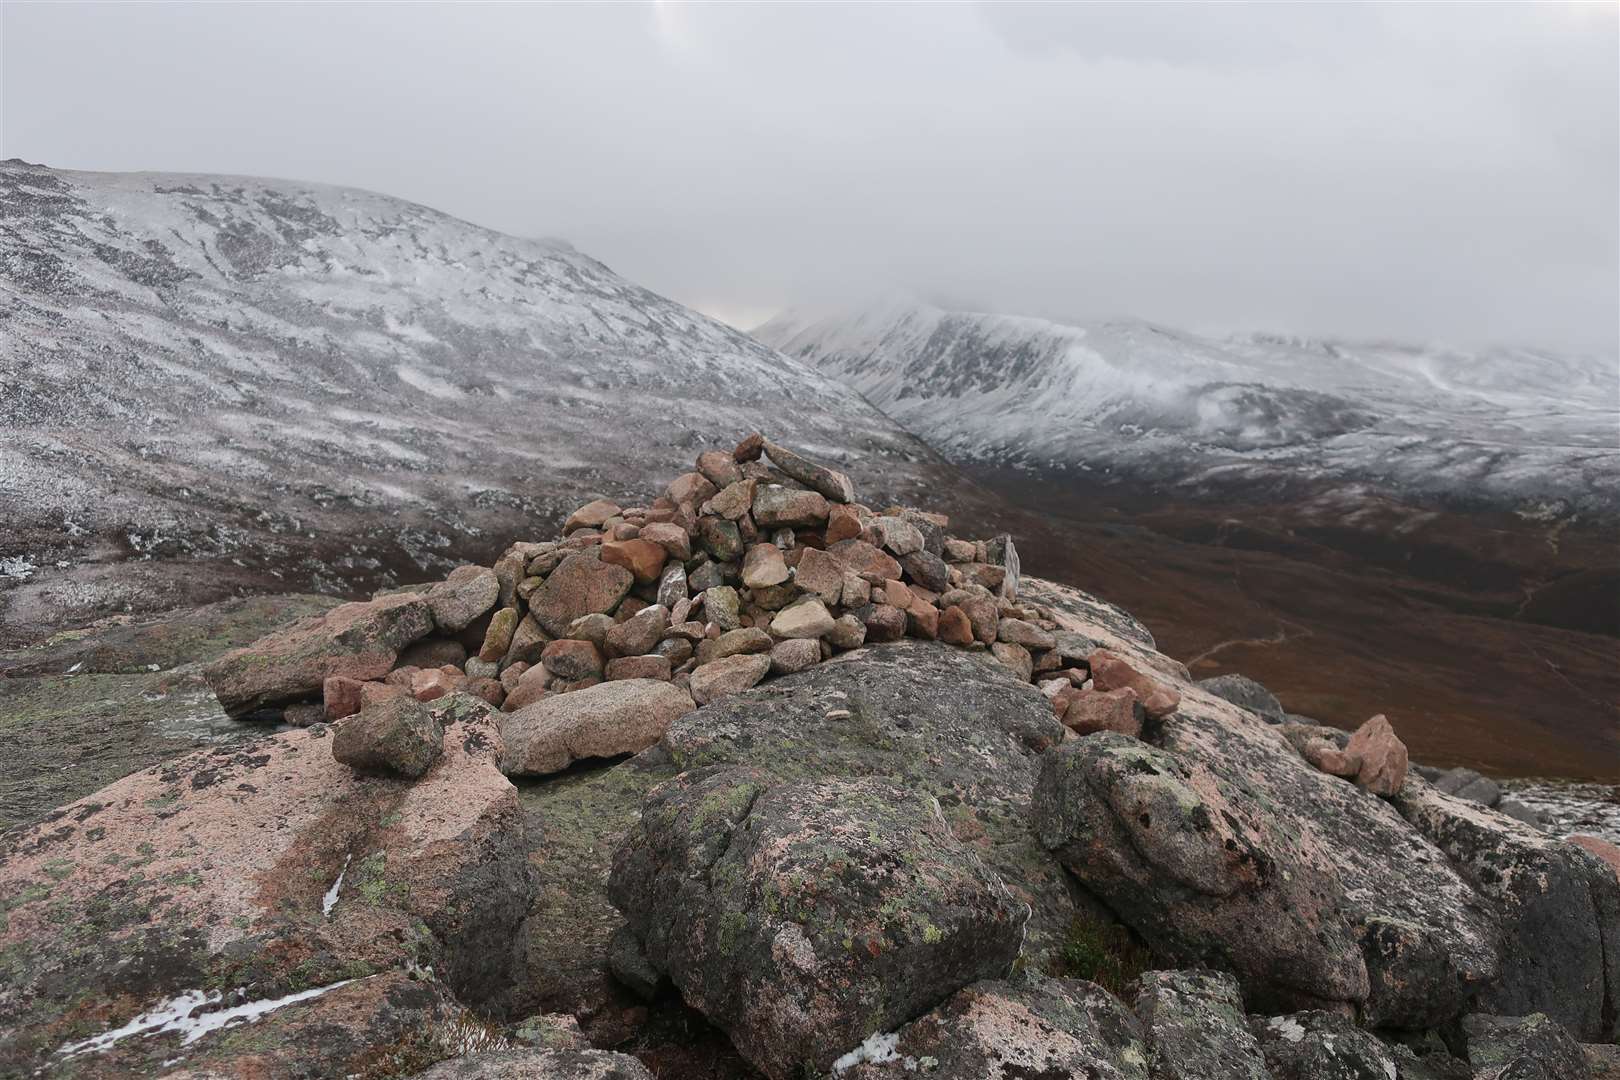 Creag a' Chalamain looking over the Lairig Ghru to the shrouded Braeriach.